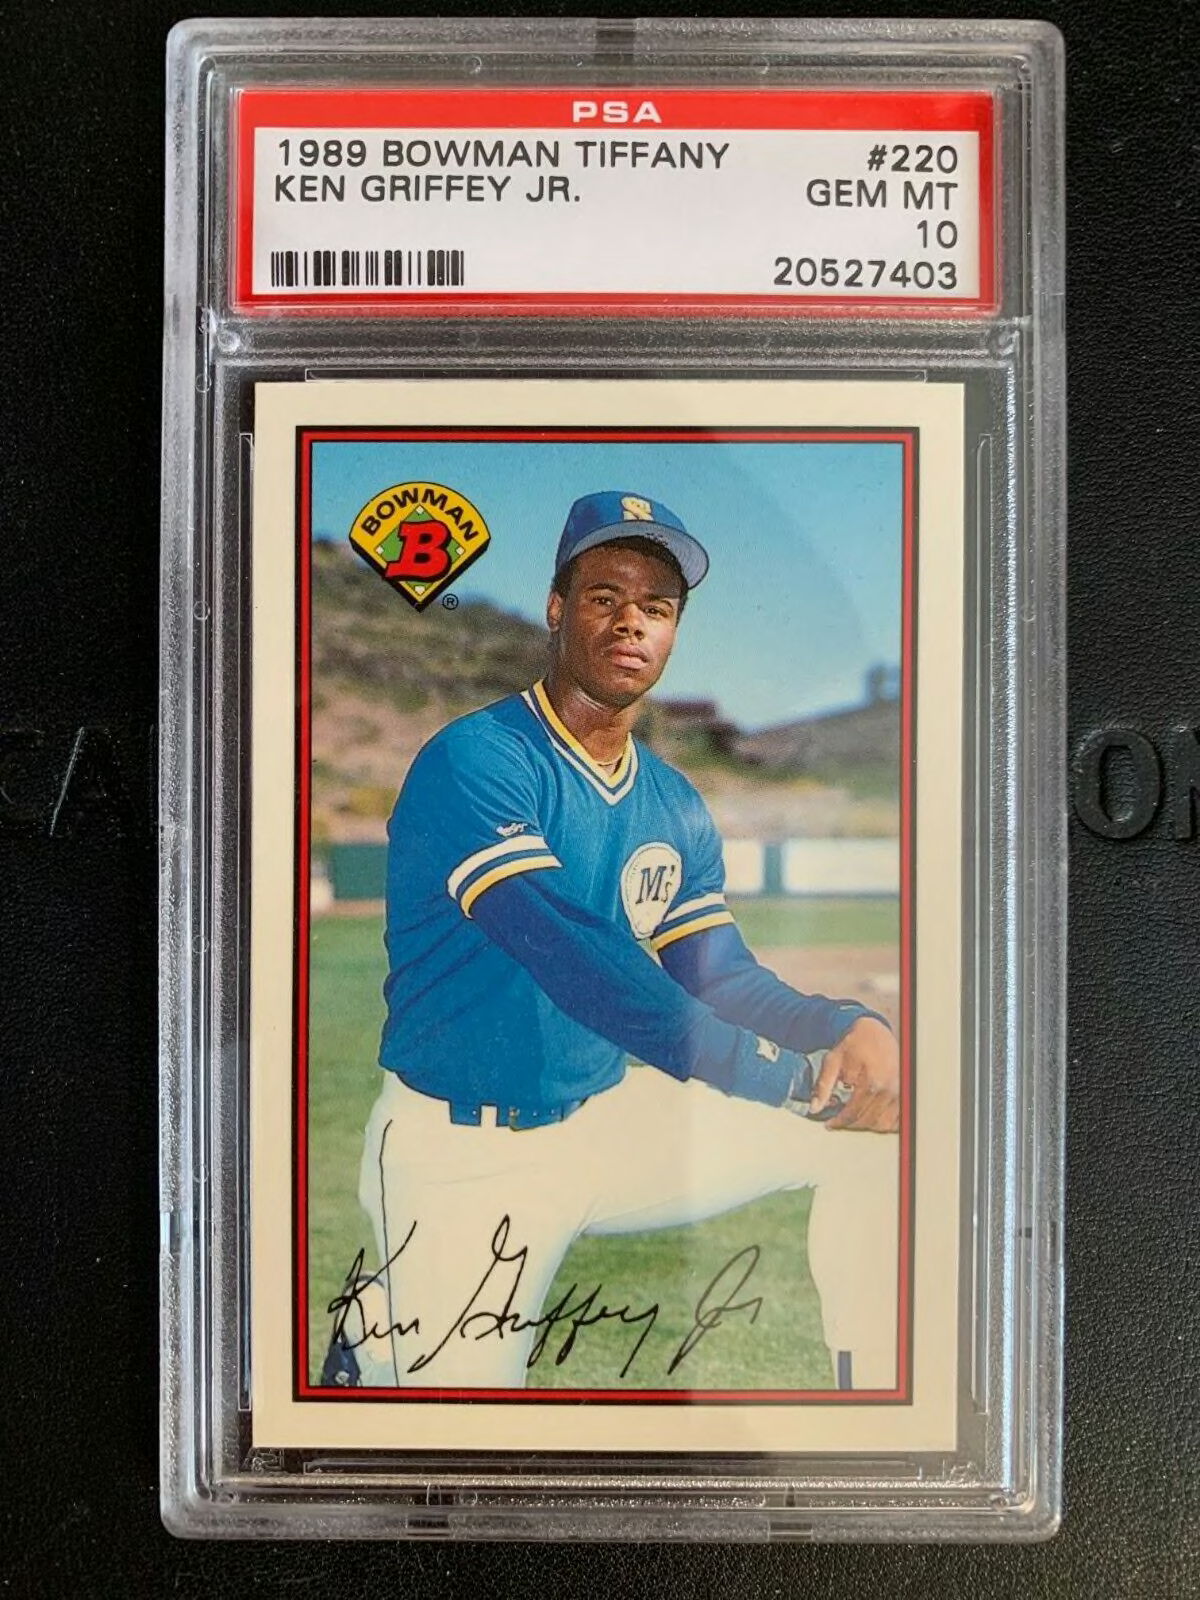 Ken Griffey Jr Rookie Card guide Most expensive and valuable cards